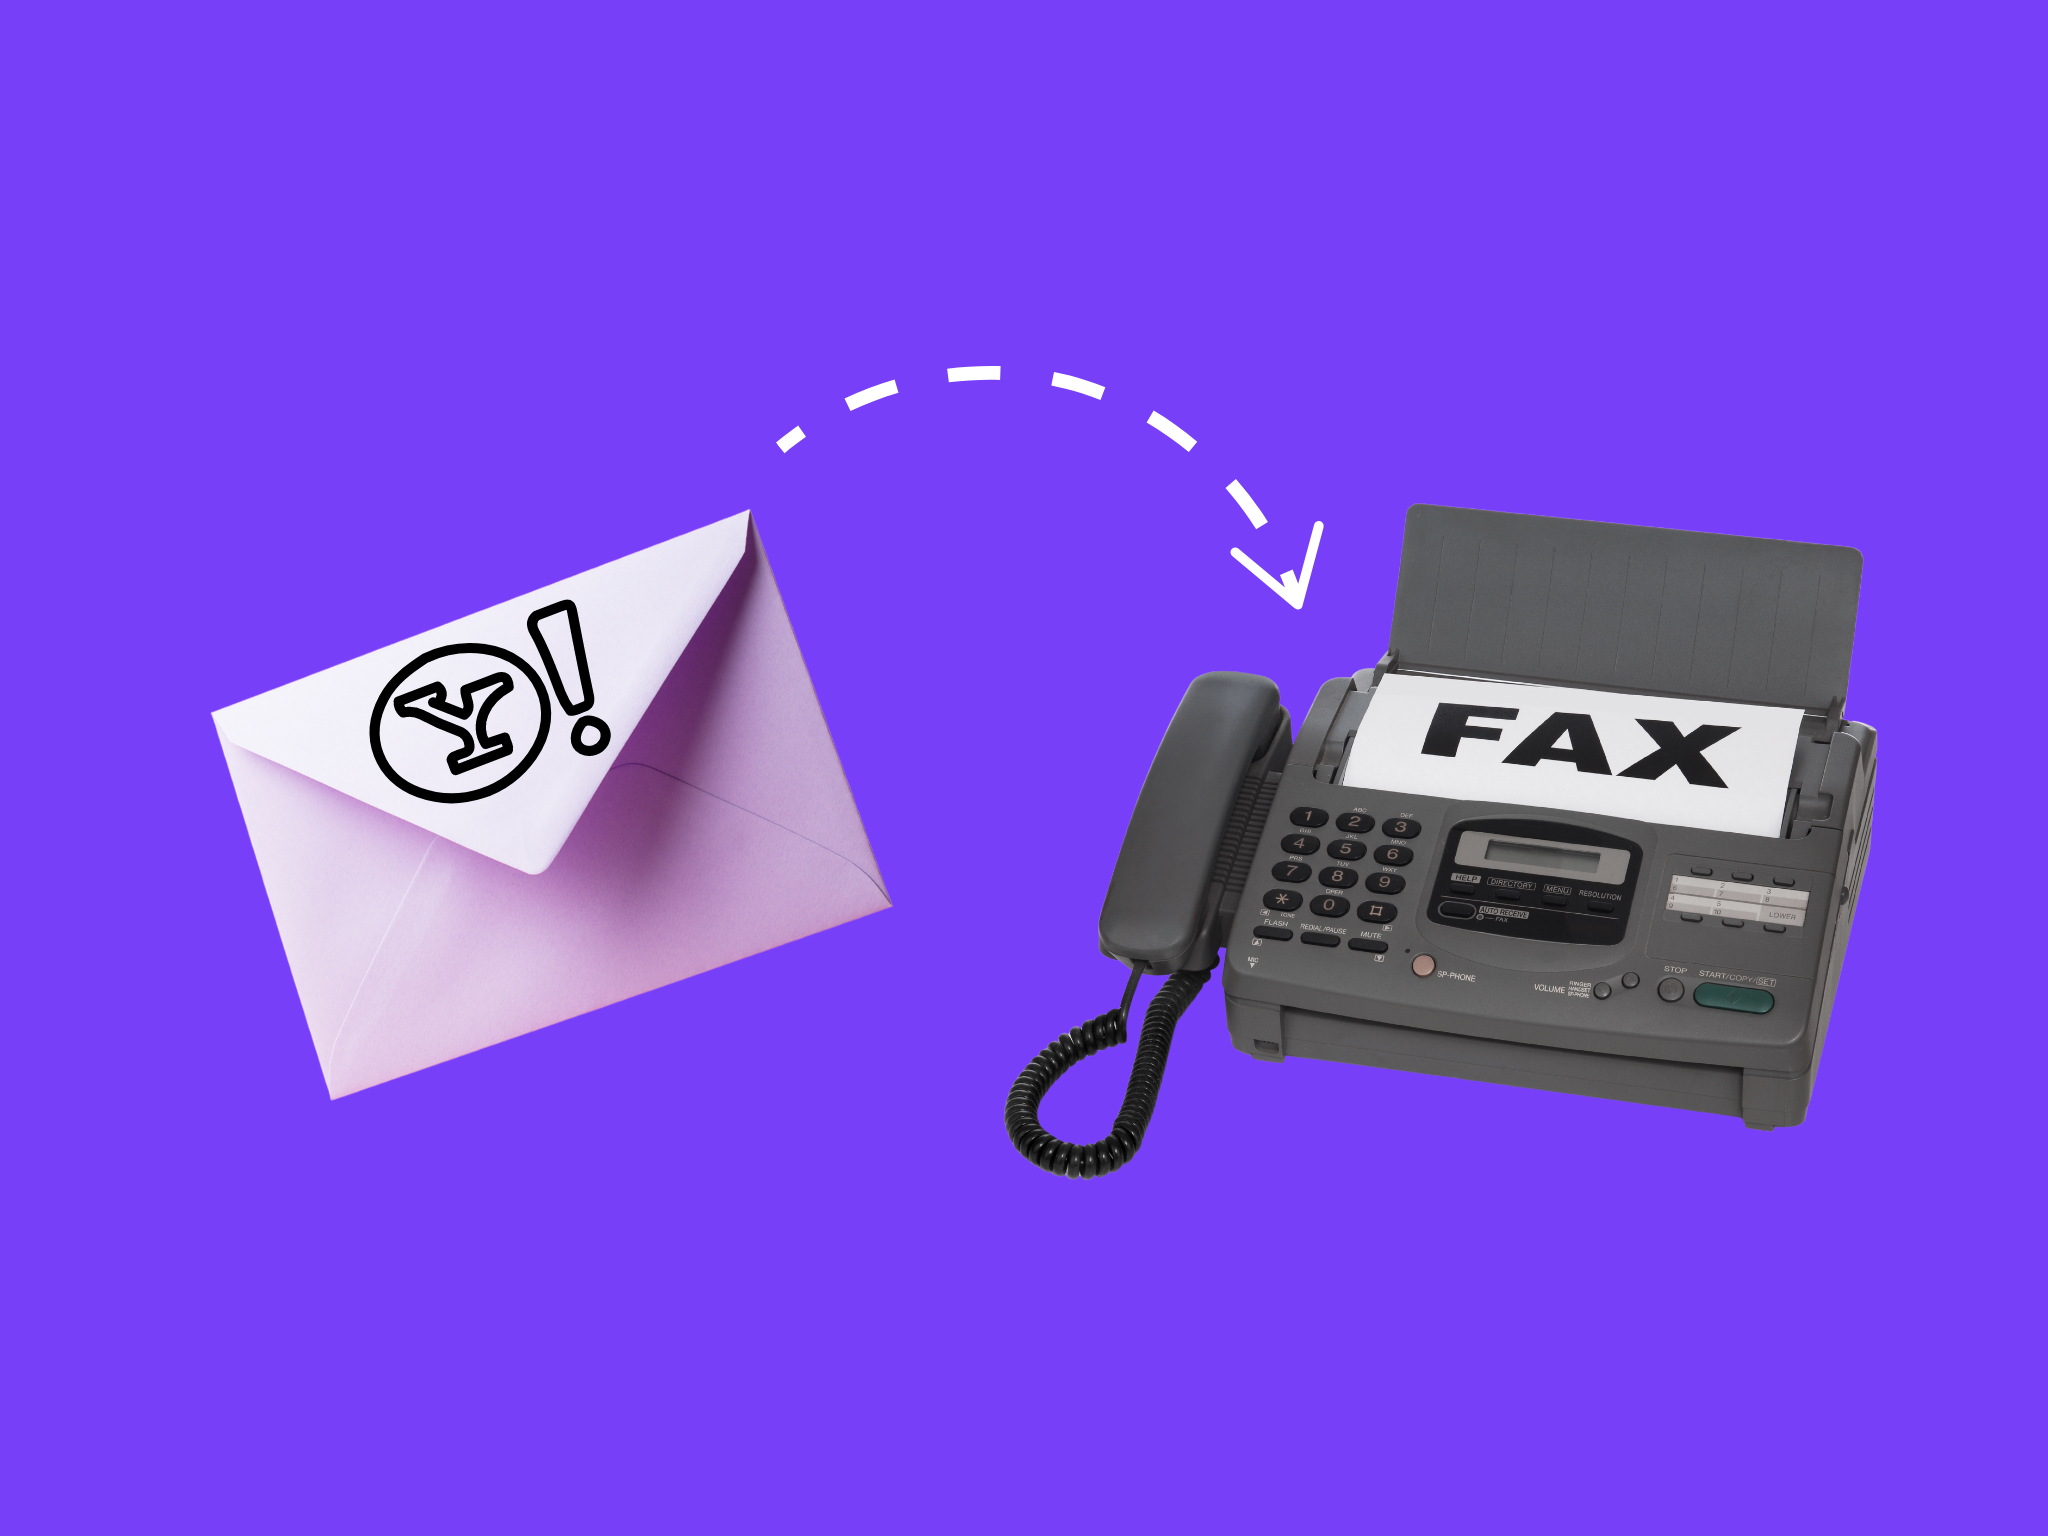 How to Fax From Yahoo Email: Follow These 6 Easy Steps